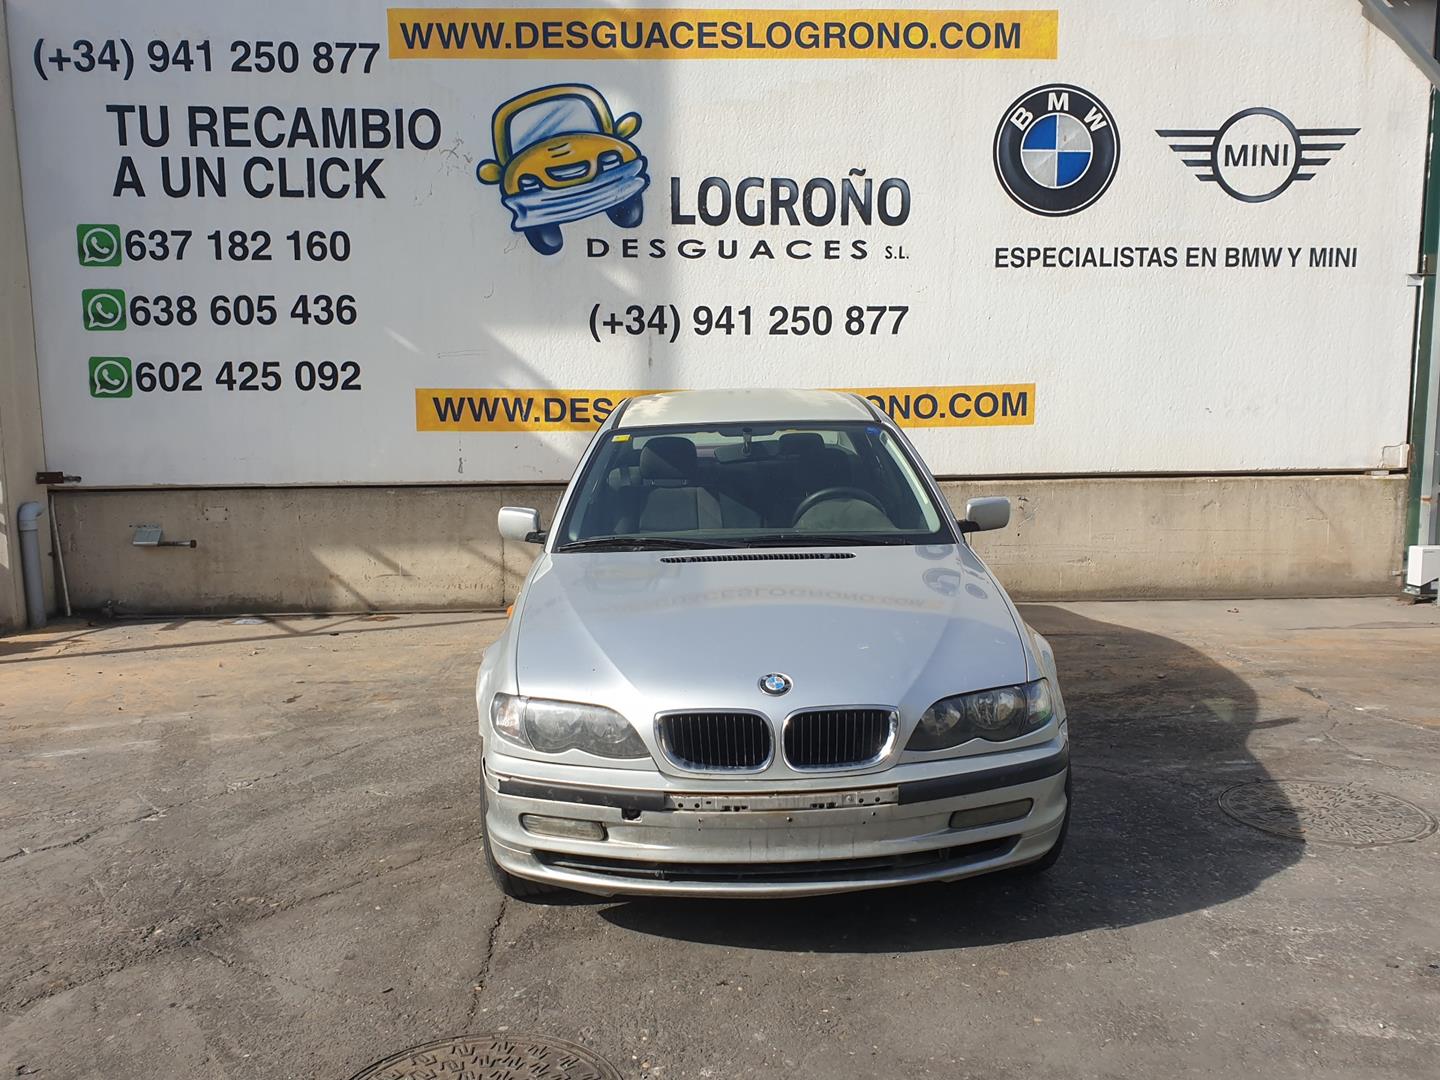 BMW 3 Series E46 (1997-2006) Other Control Units 61318373691, 8373691 19934812